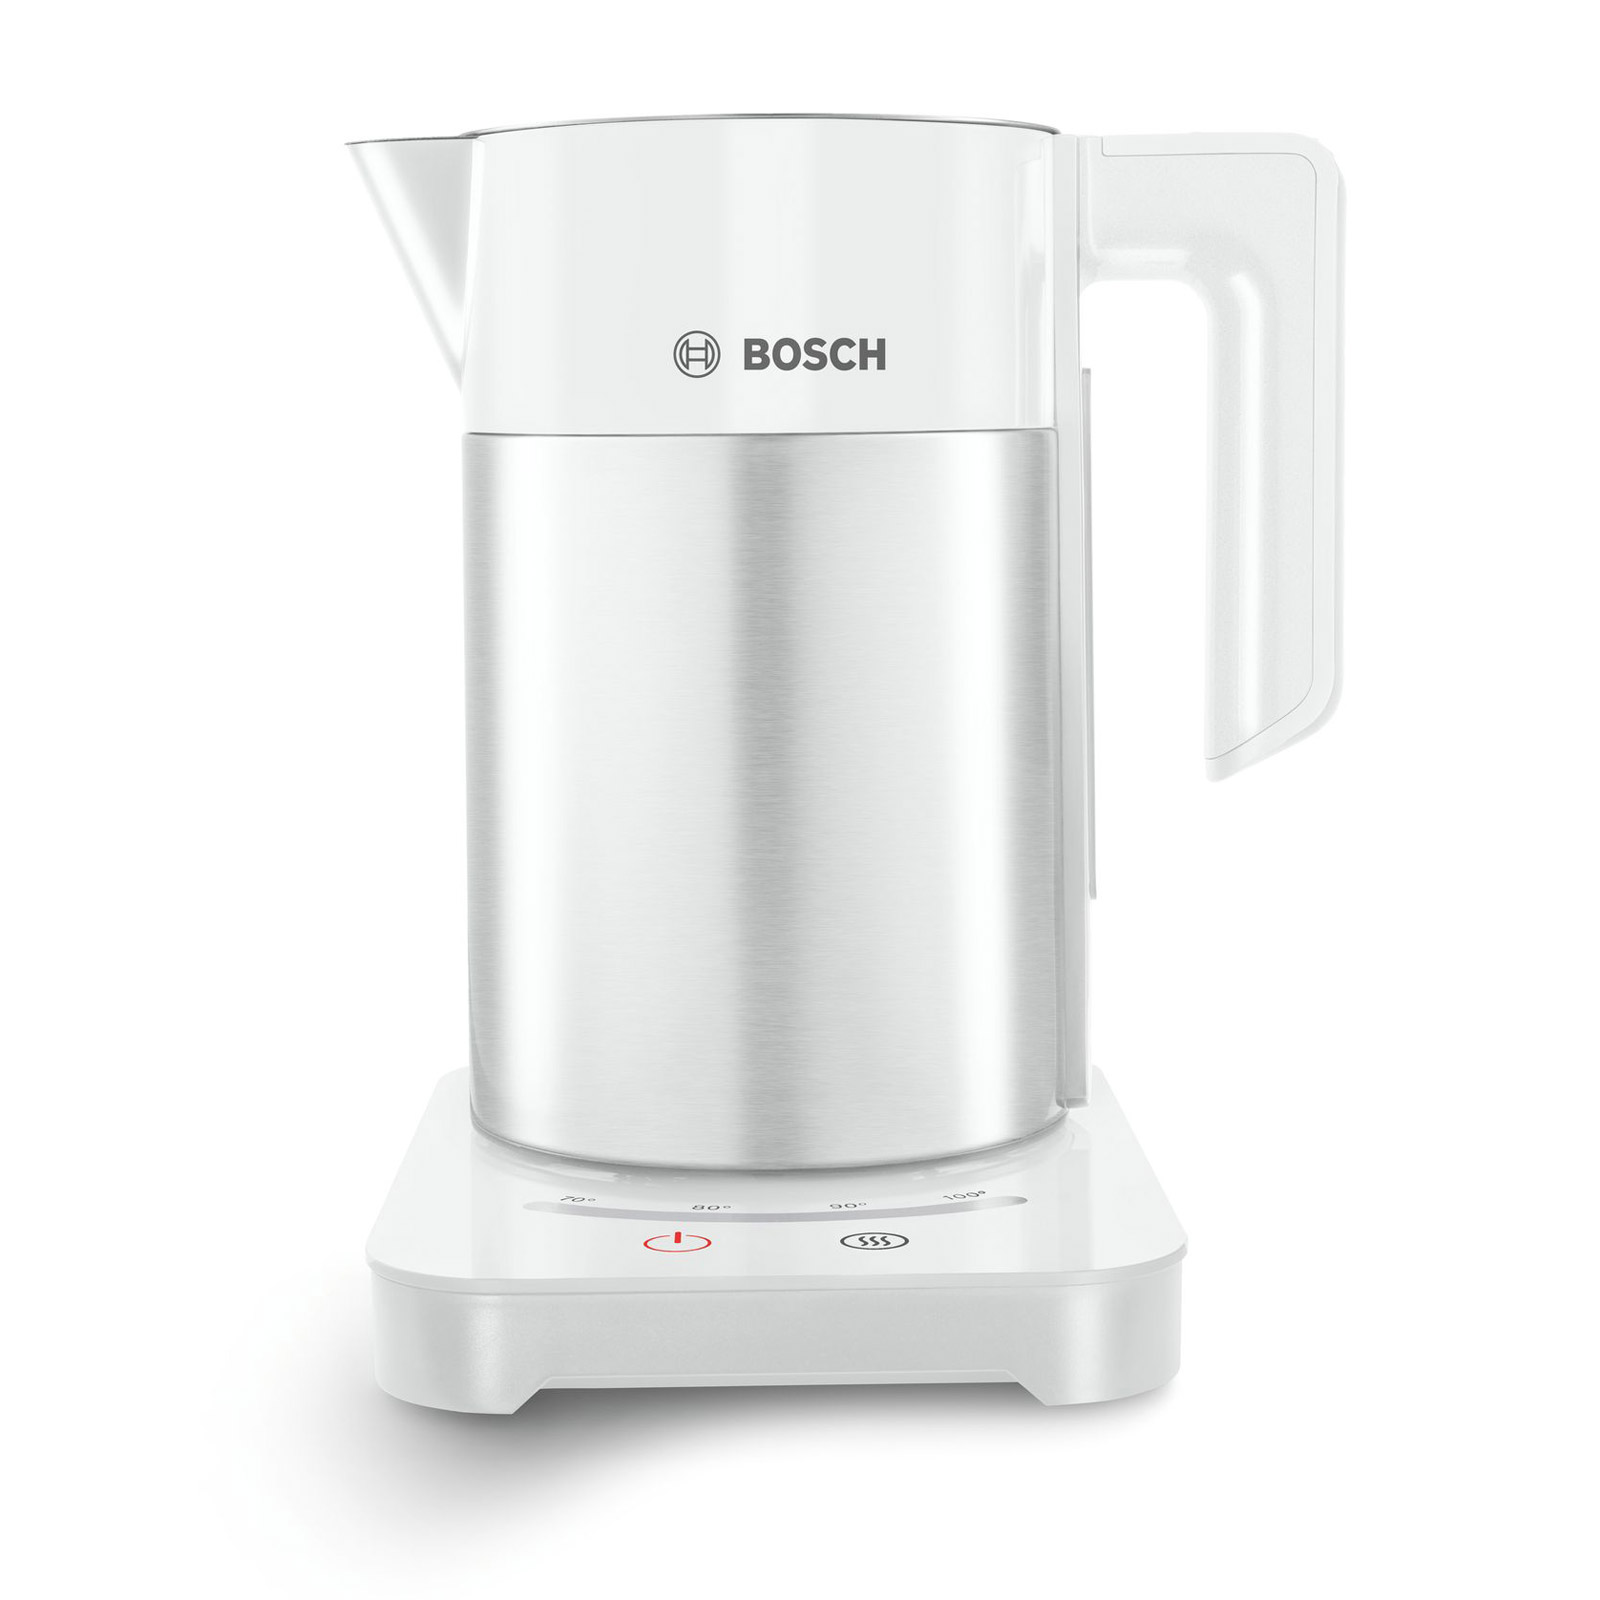 Image of Bosch TWK7201GB Cordless Jug Kettle in Stainless Steel White 1 7L